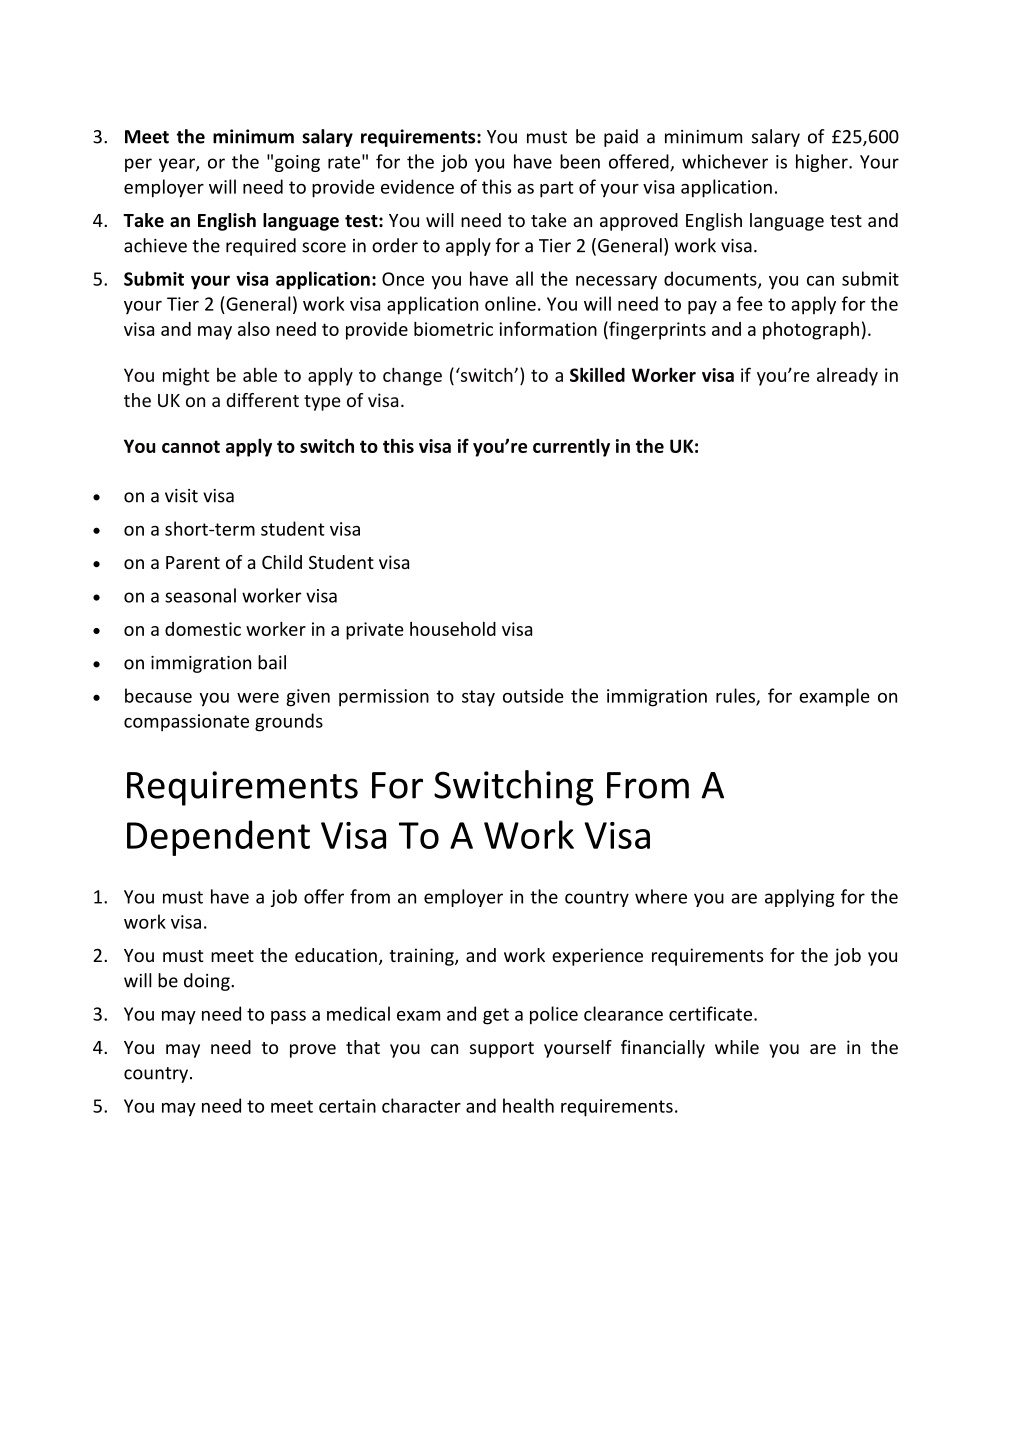 PPT How To Convert Dependent Visa To Work Permit In The UK